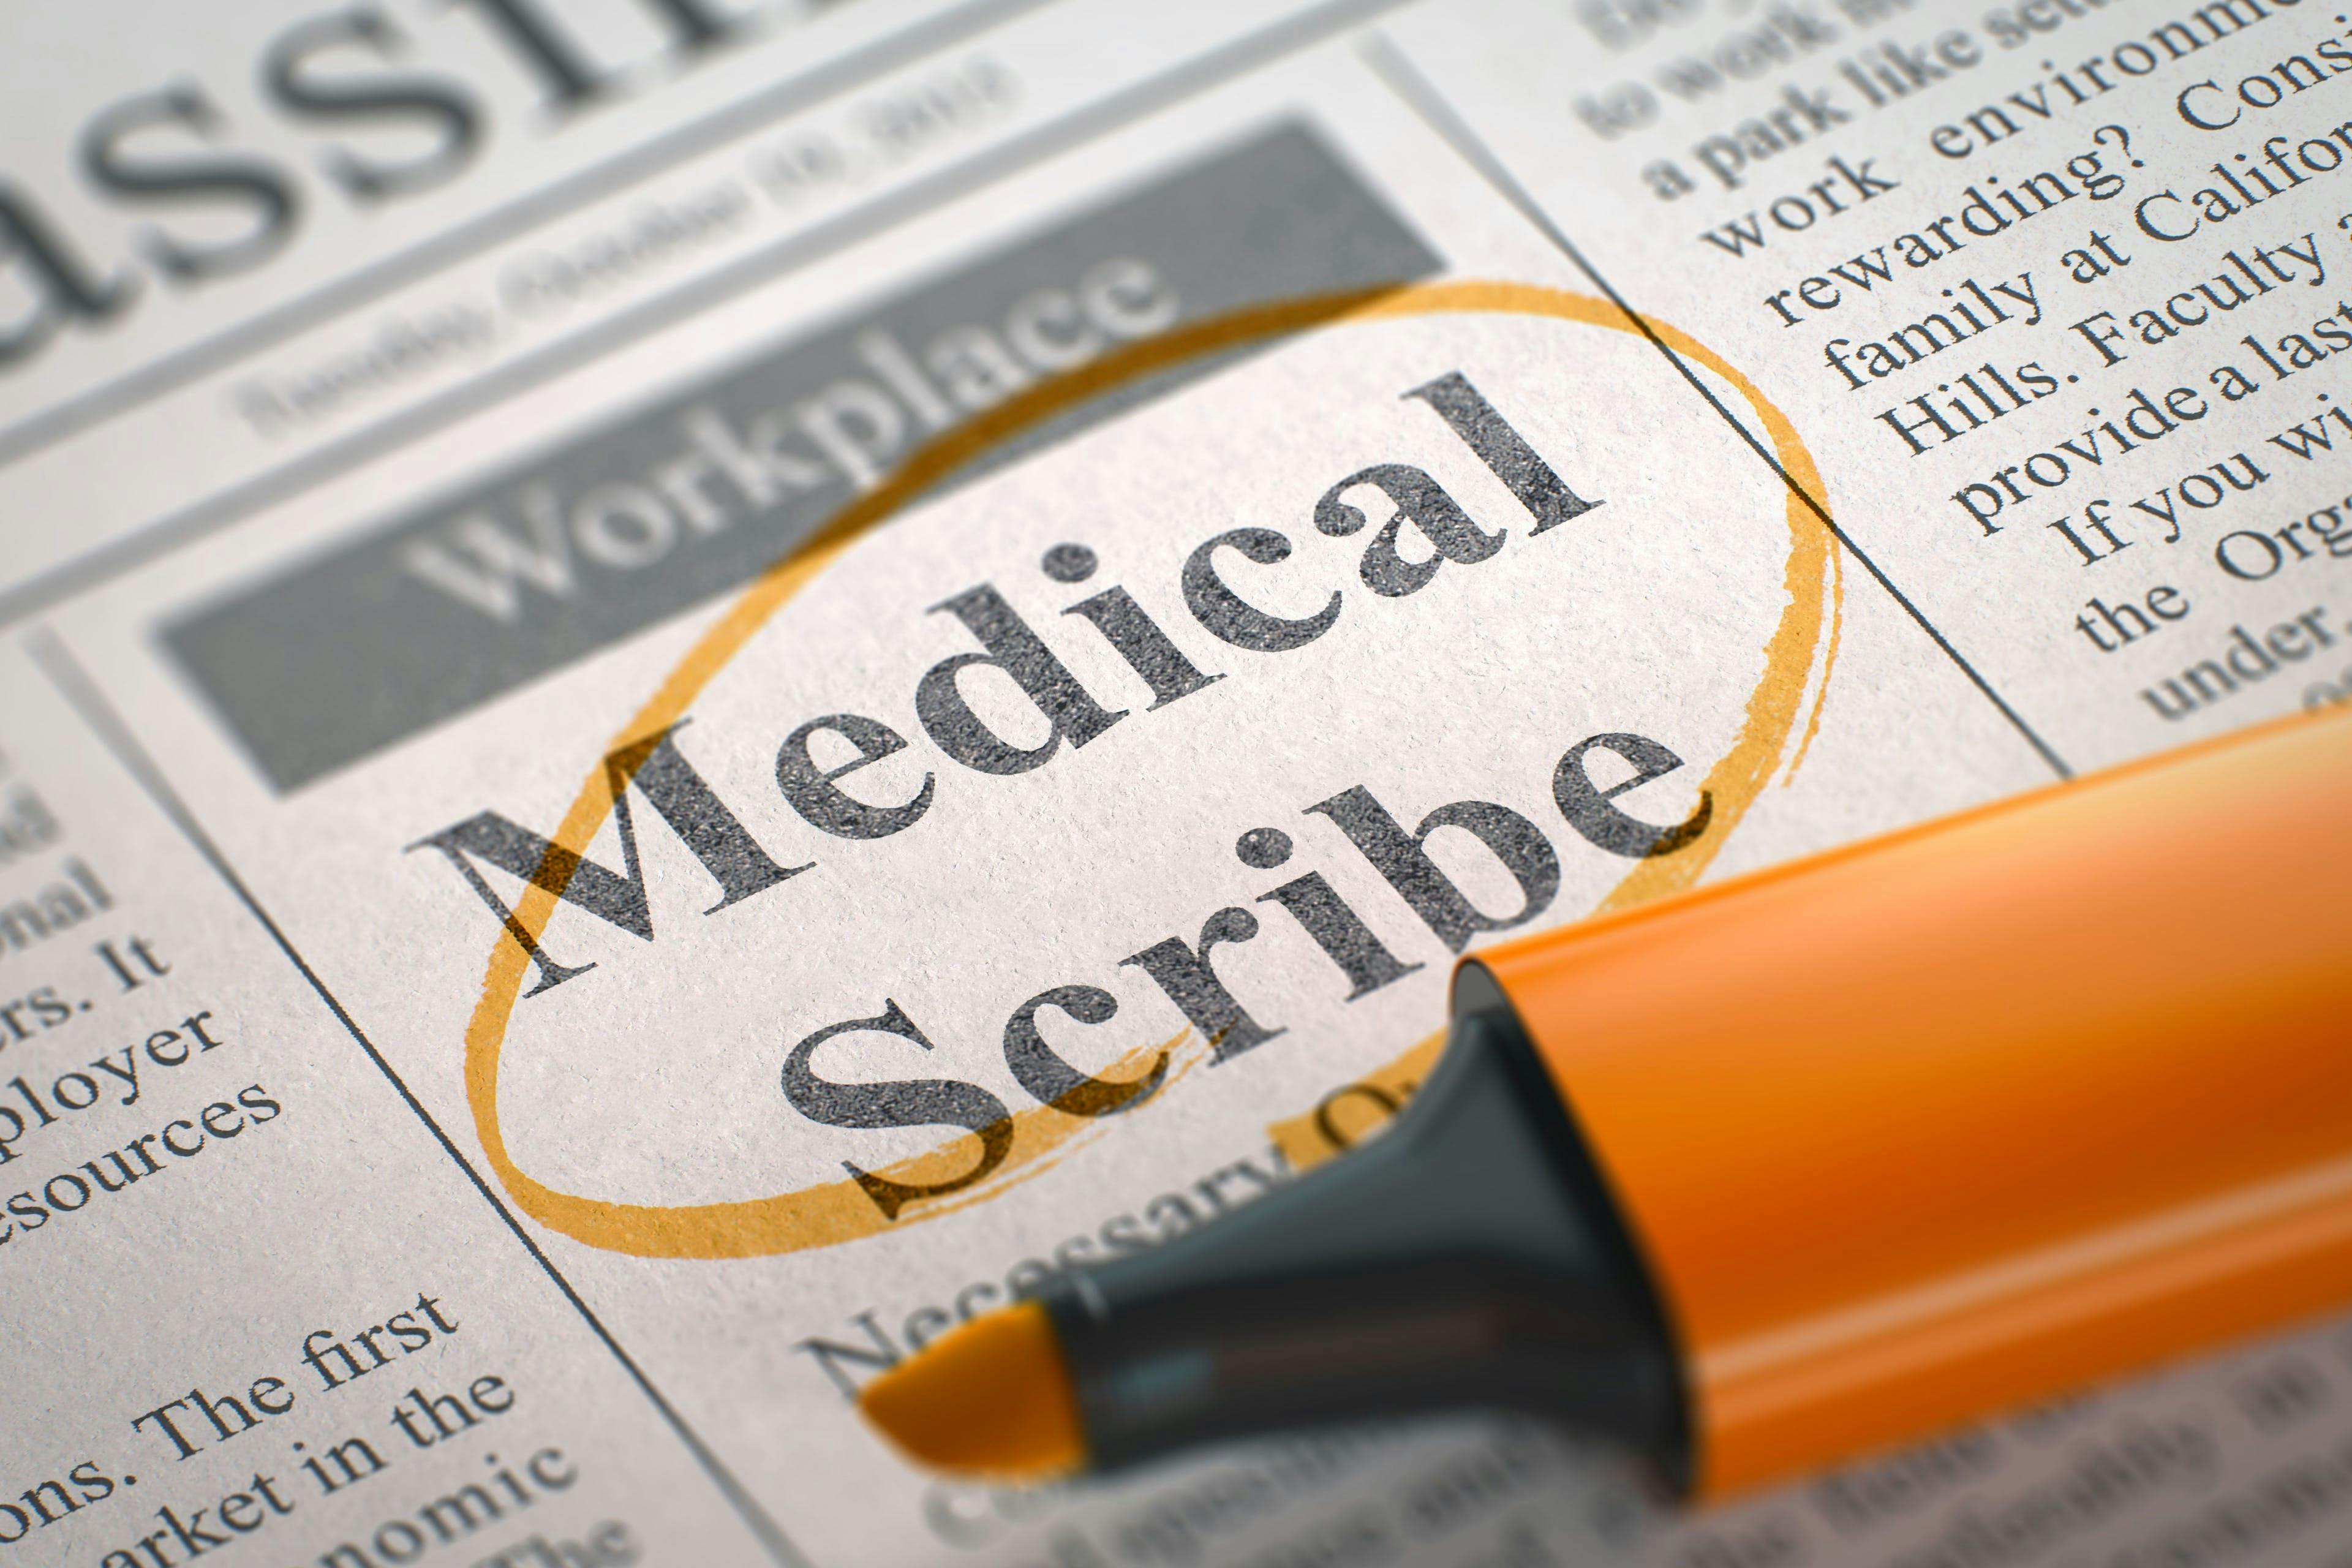 Is a medical scribe right for your practice?